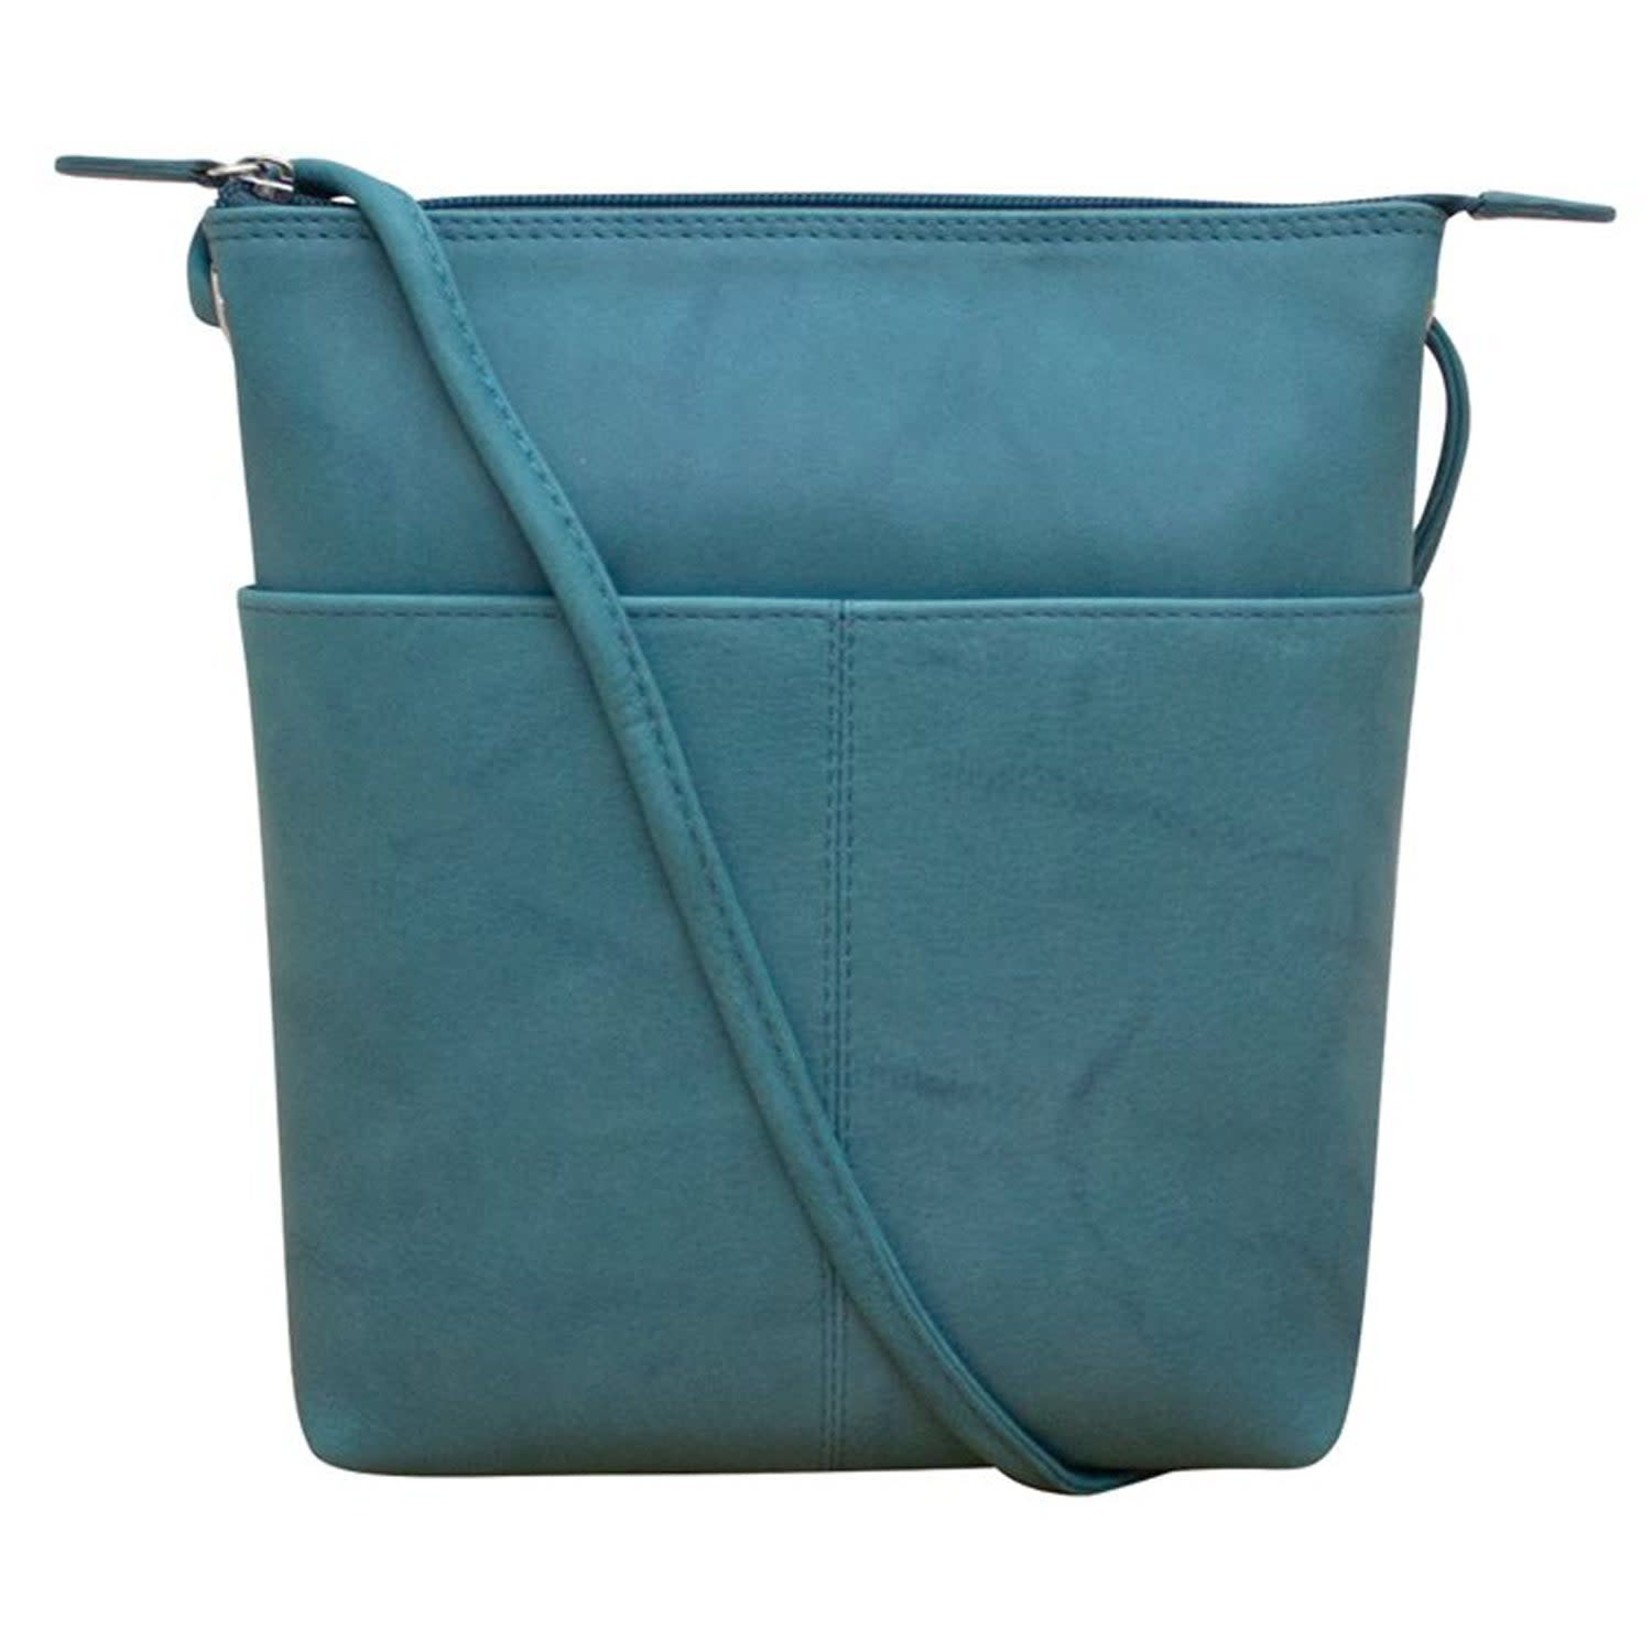 Leather Handbags and Accessories 6661 Jeans Blue - Midi Sac